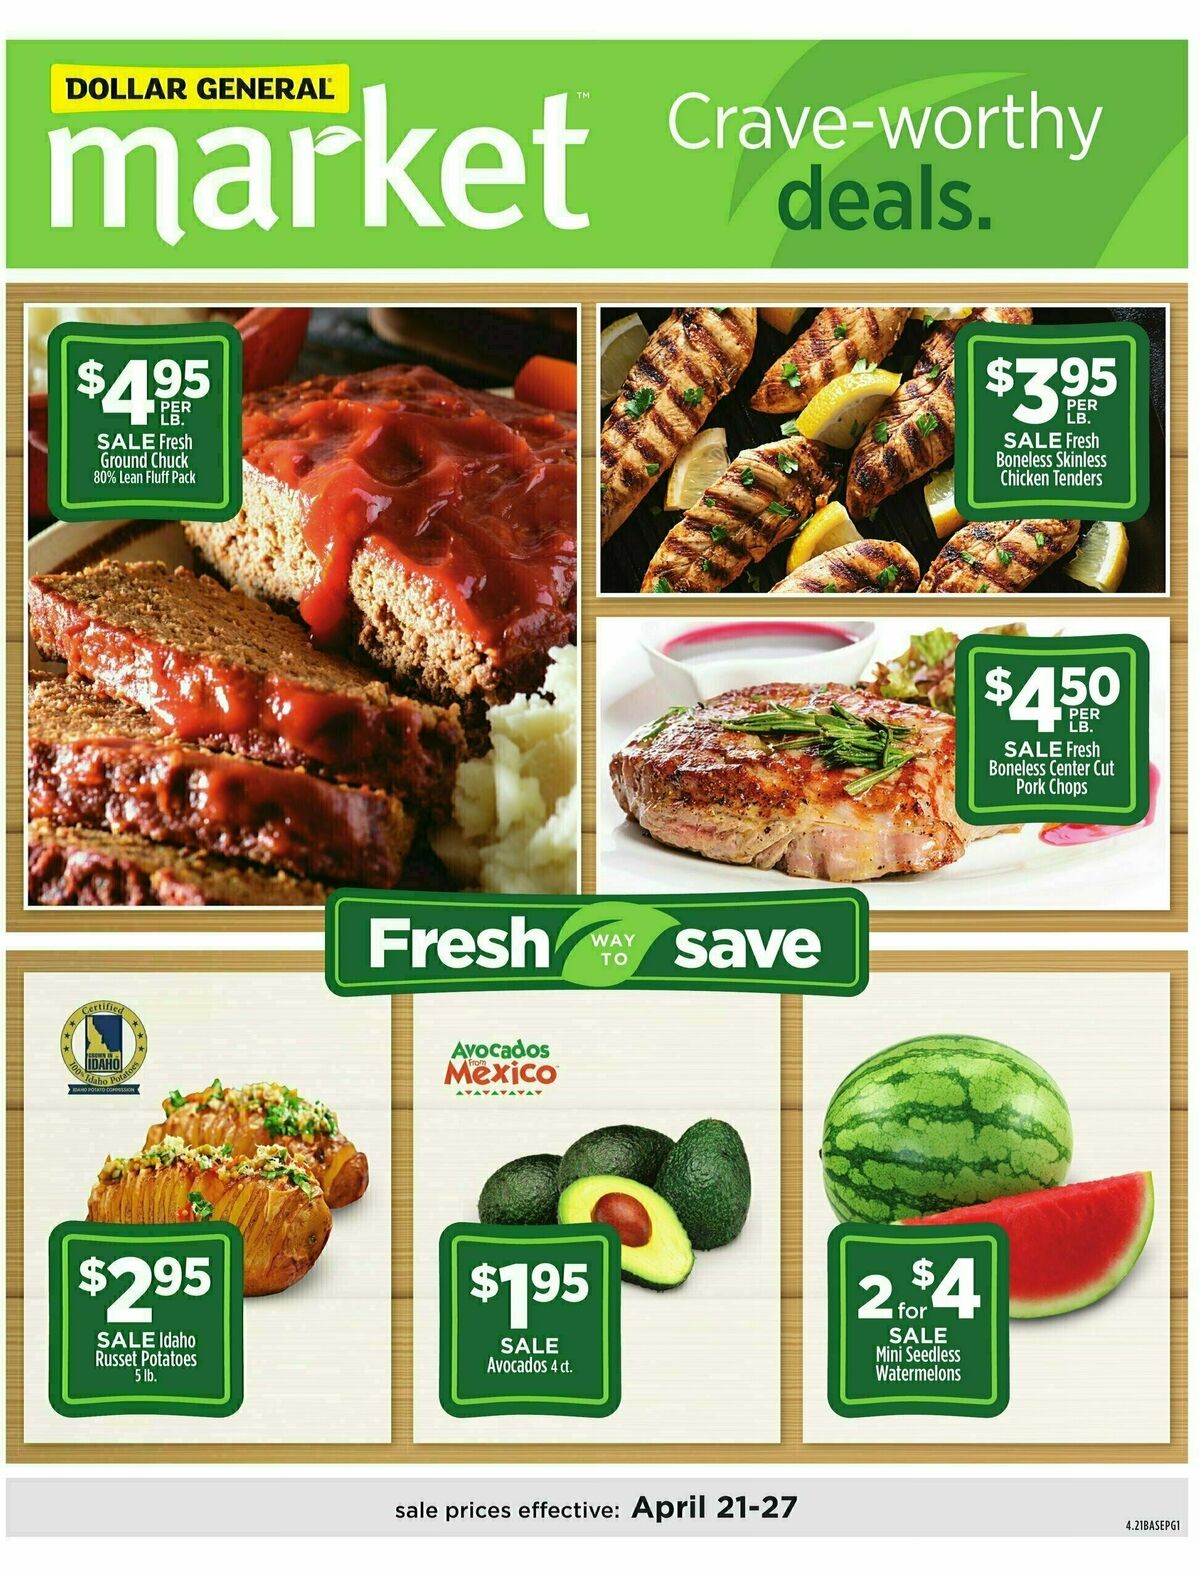 Dollar General Market Ad Weekly Ad from April 21